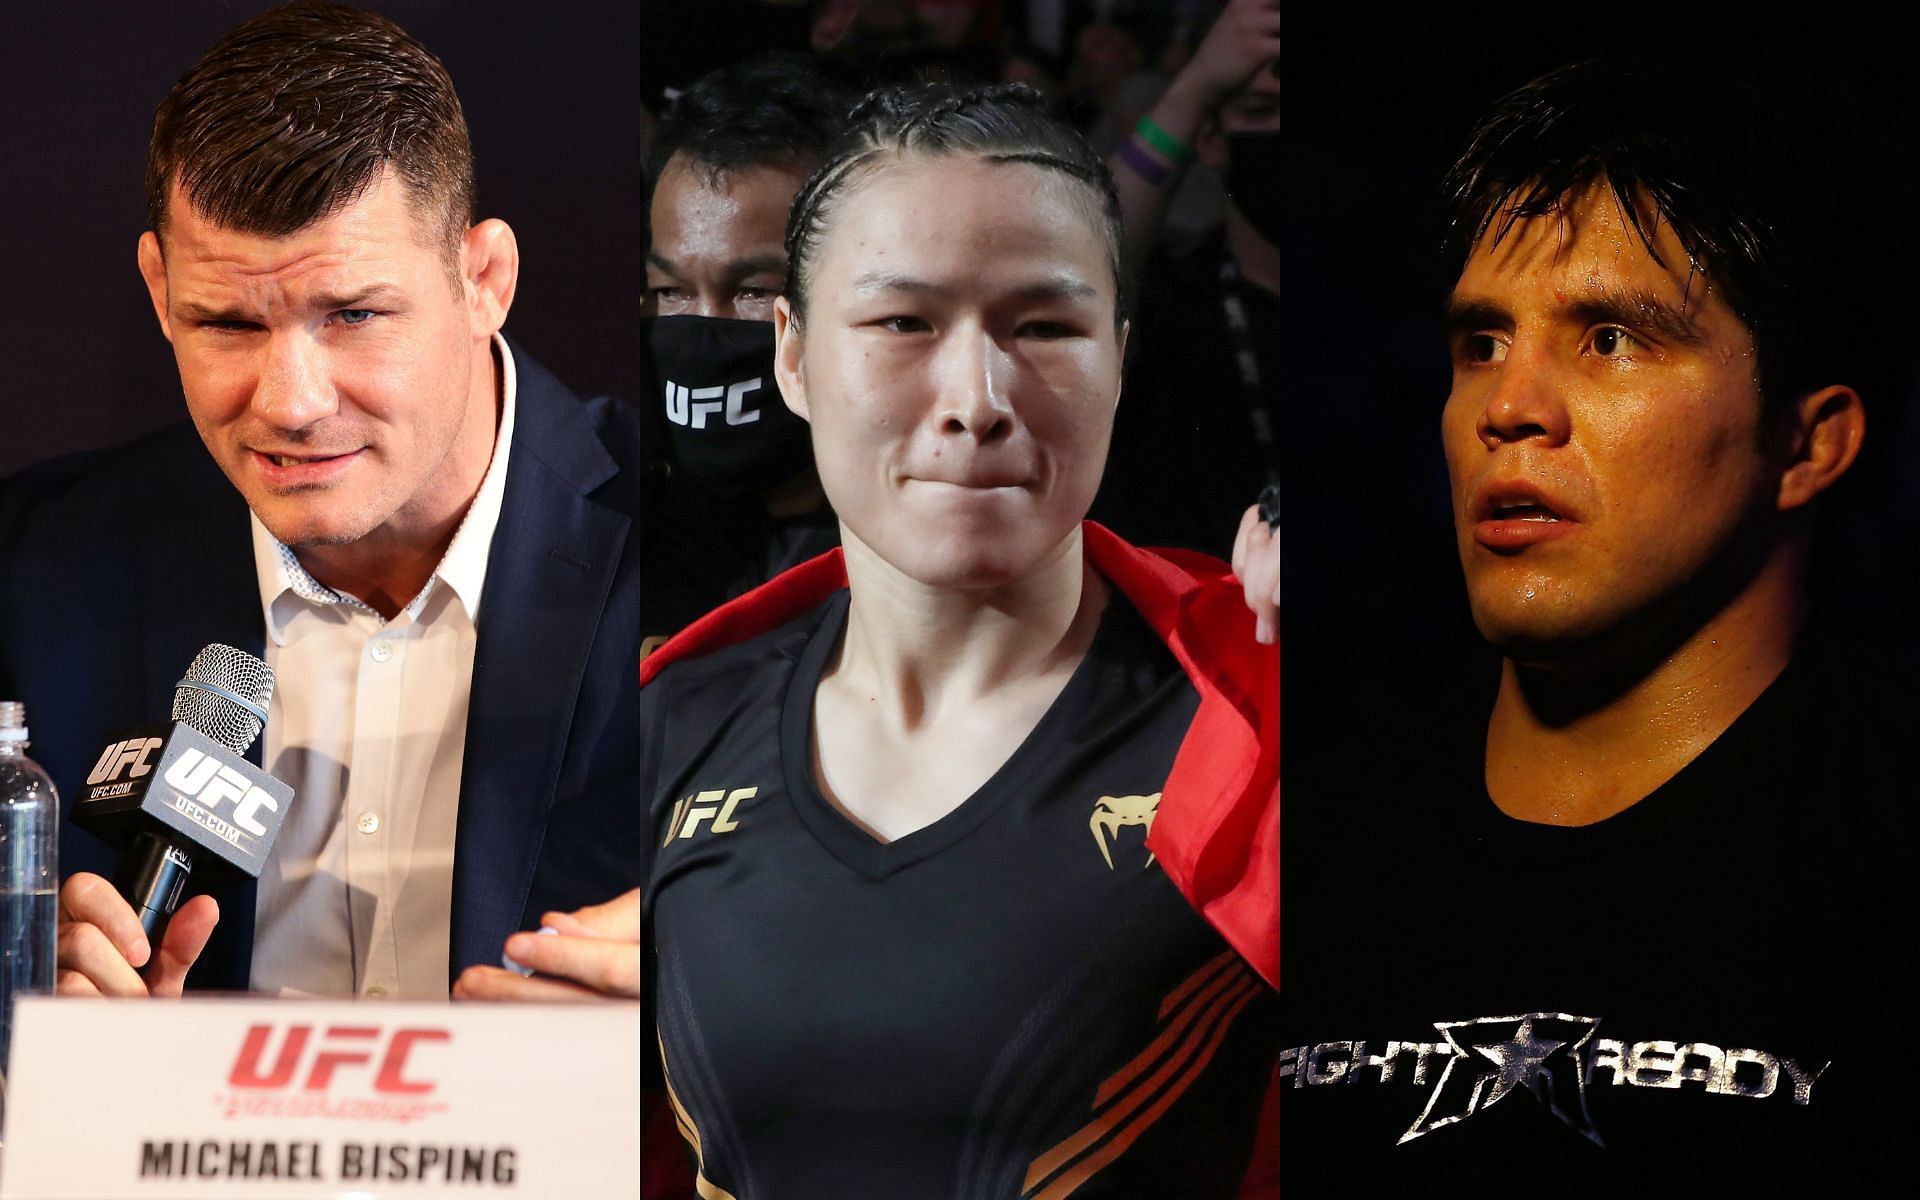 Michael Bisping (left), Zhang Weili (center) and Henry Cejudo (right)